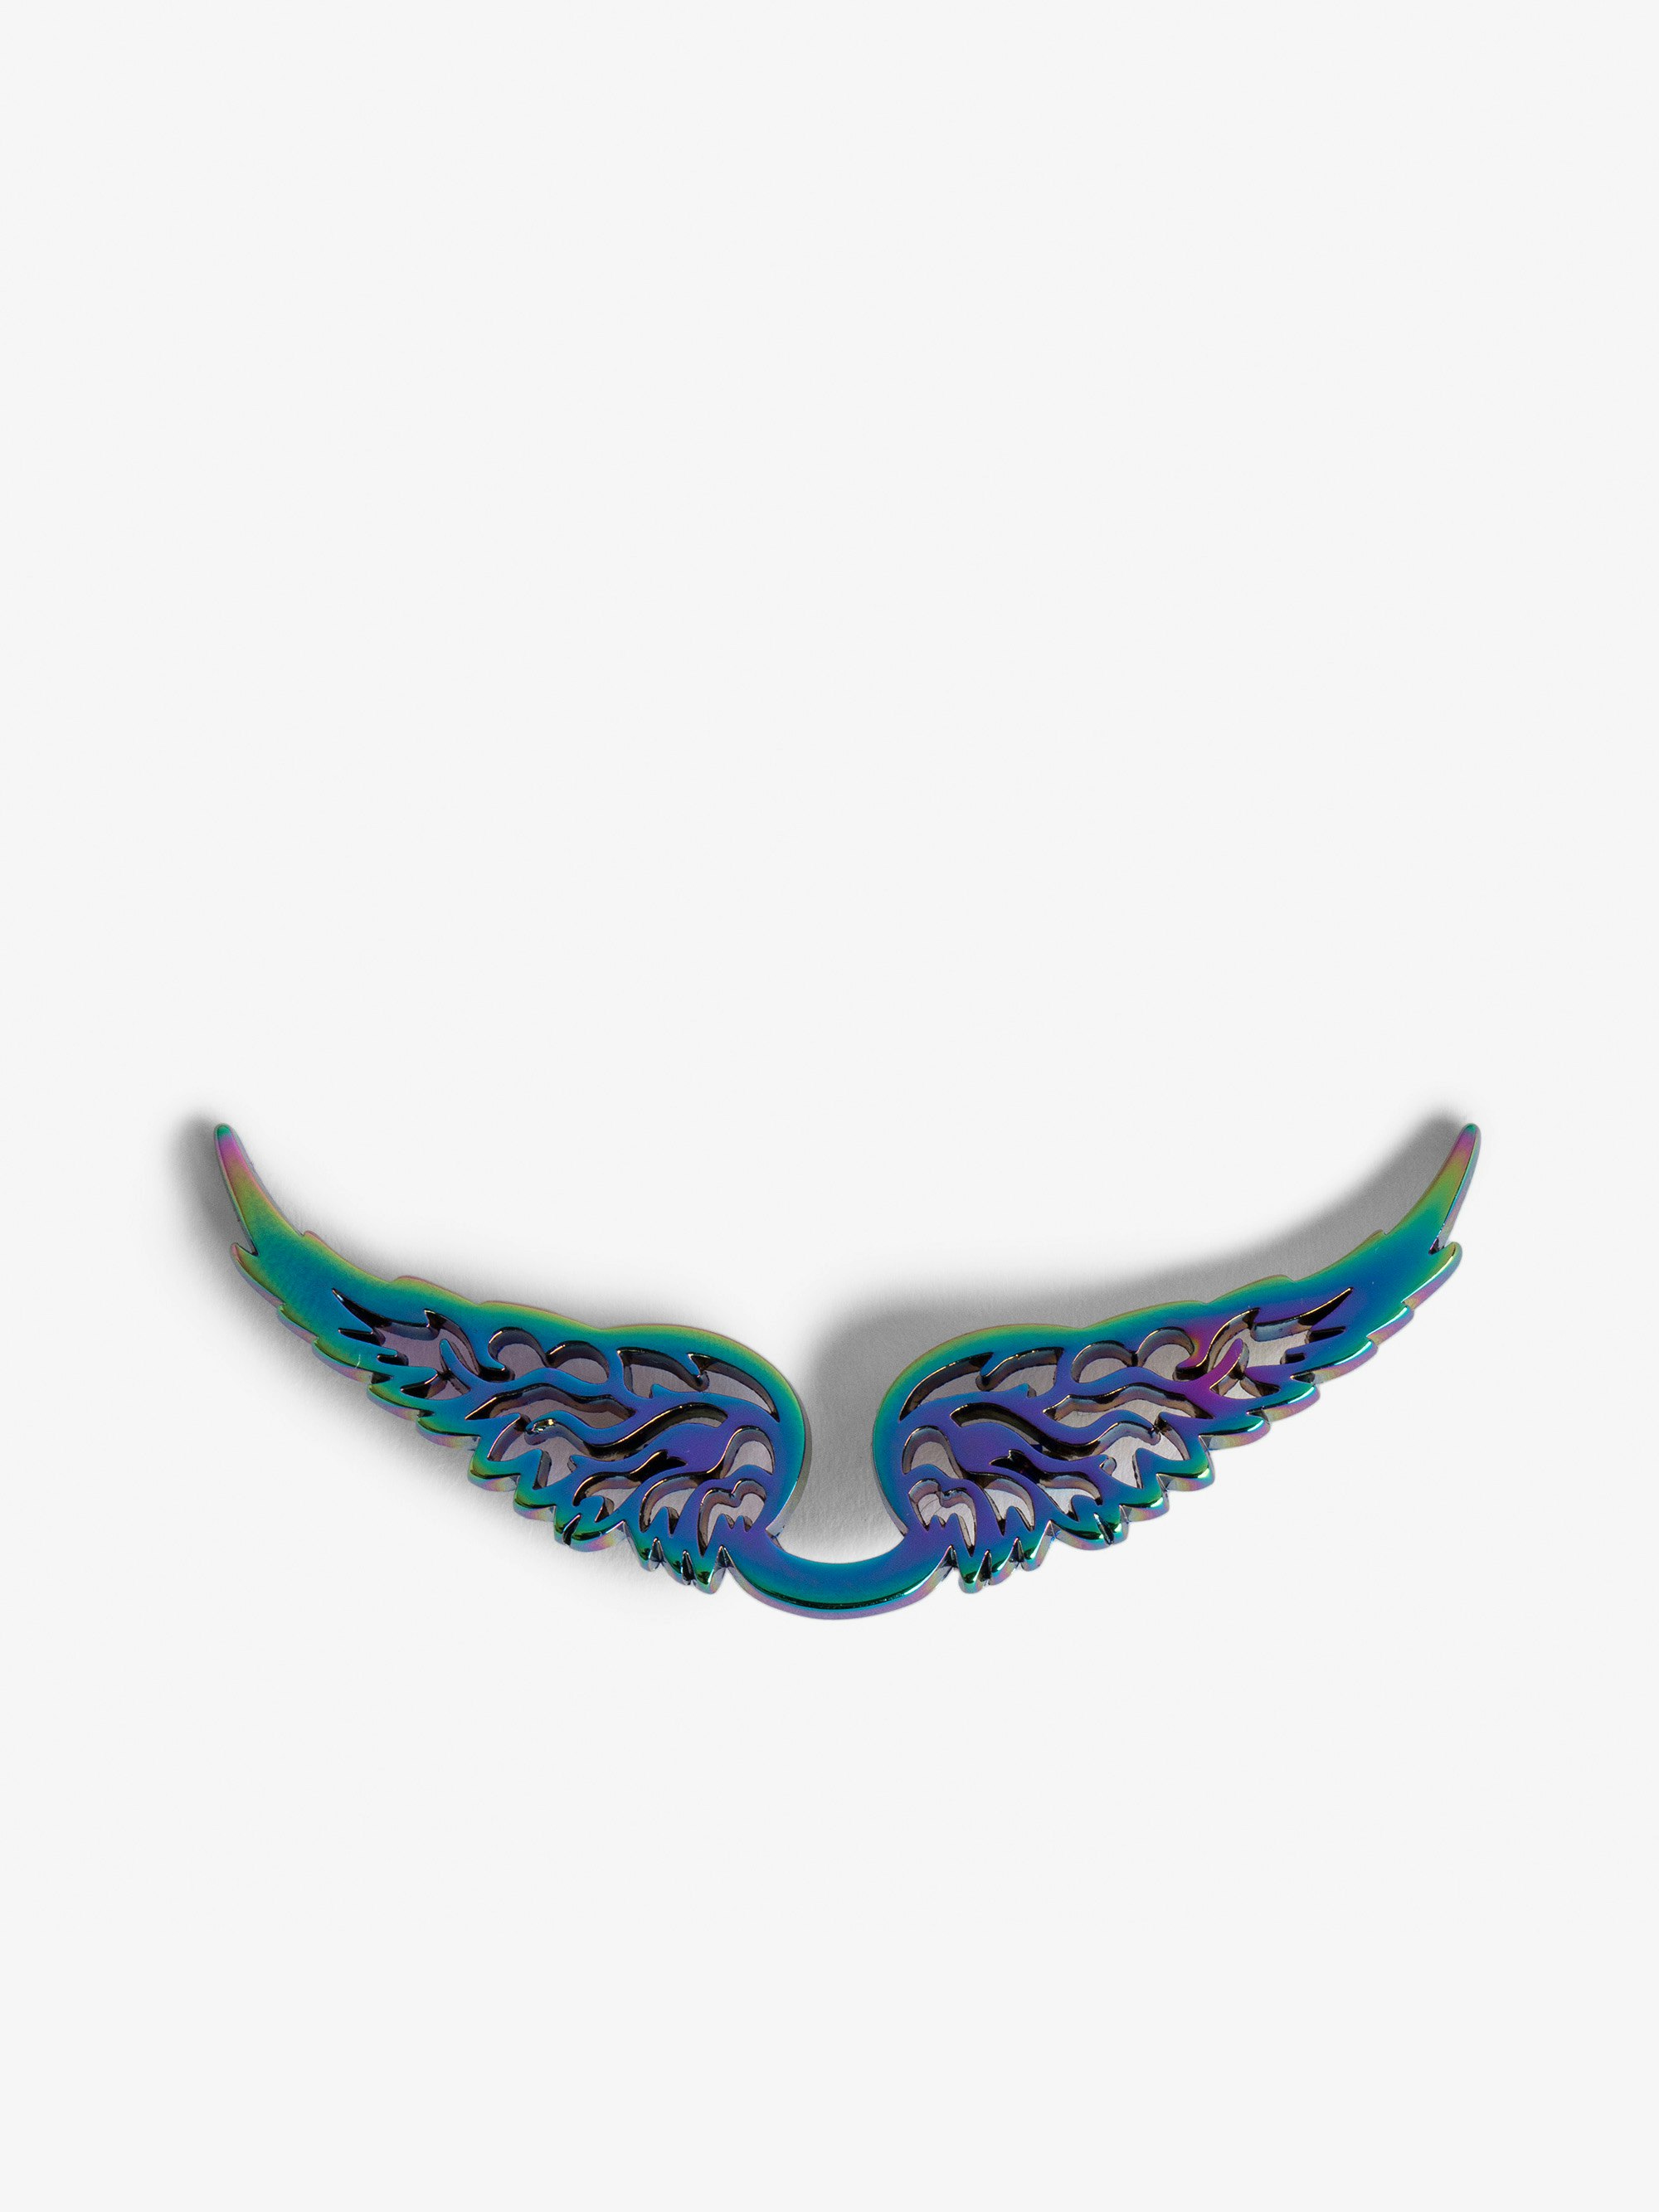 Rainbow Swing Your Wings Charm - Clip-on wings charm for Rock Swing Your Wings clutch.